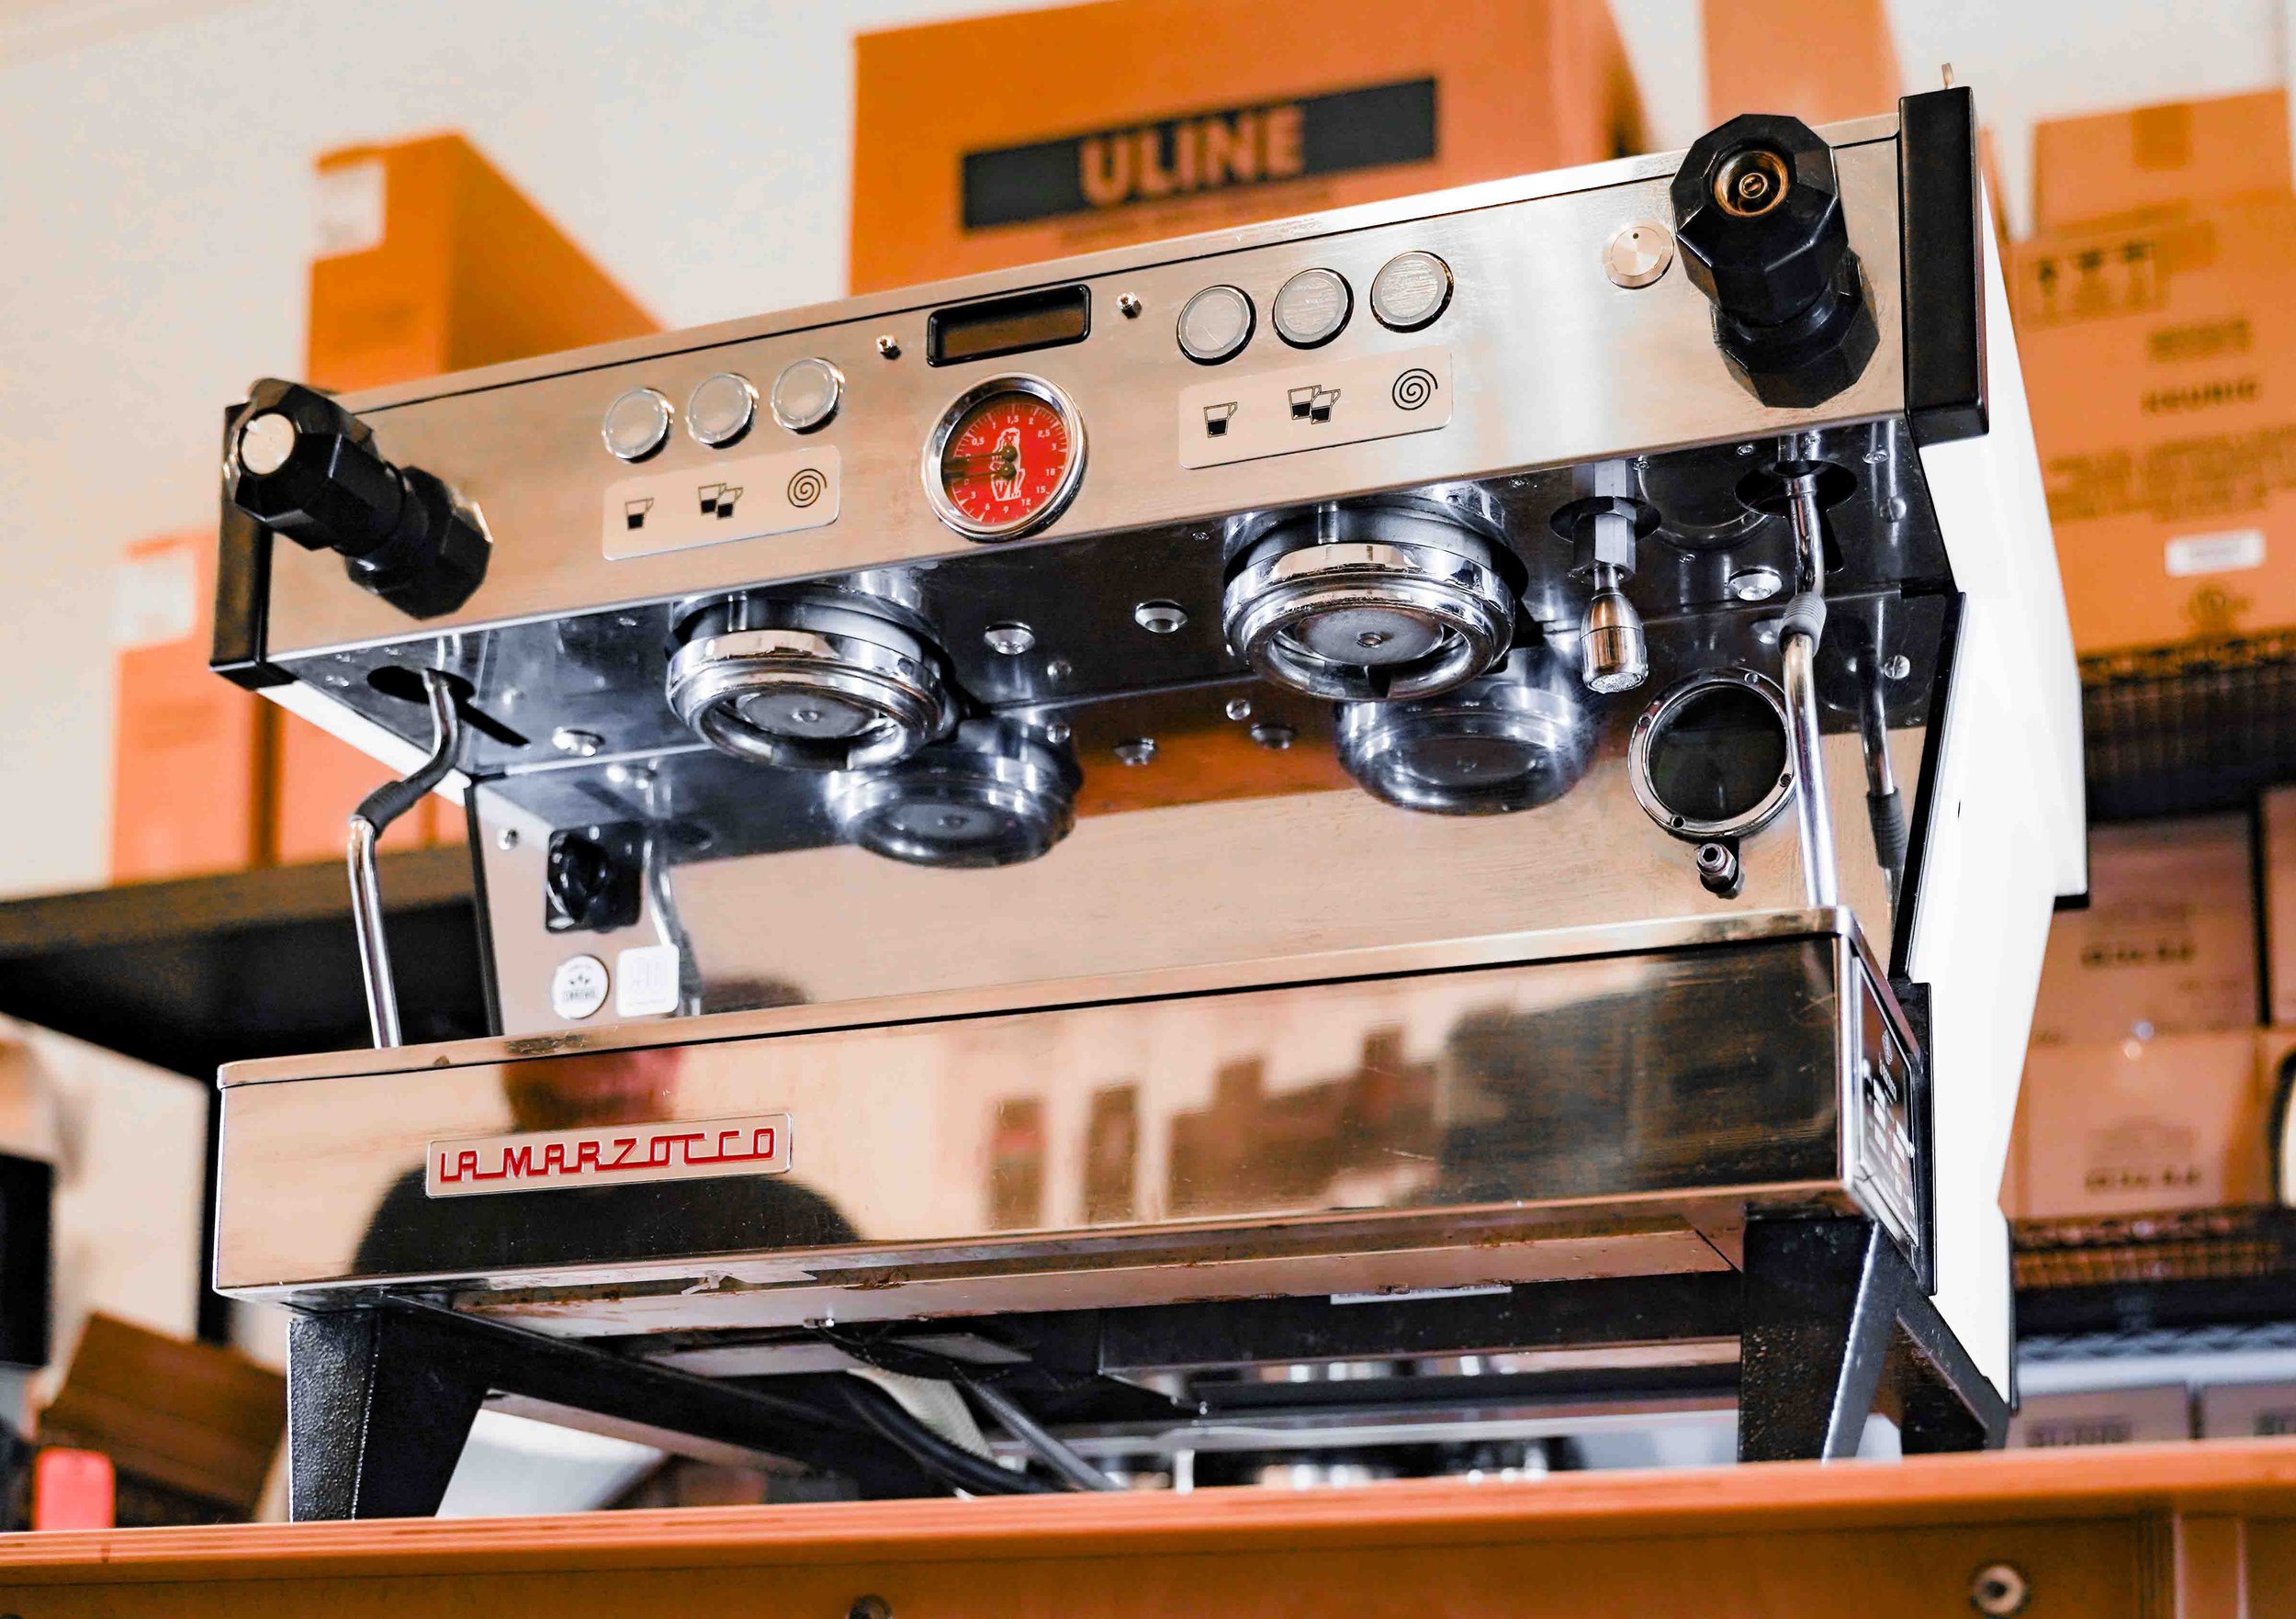 What are the different types of commercial espresso machines? — Reverie  Coffee Roasters